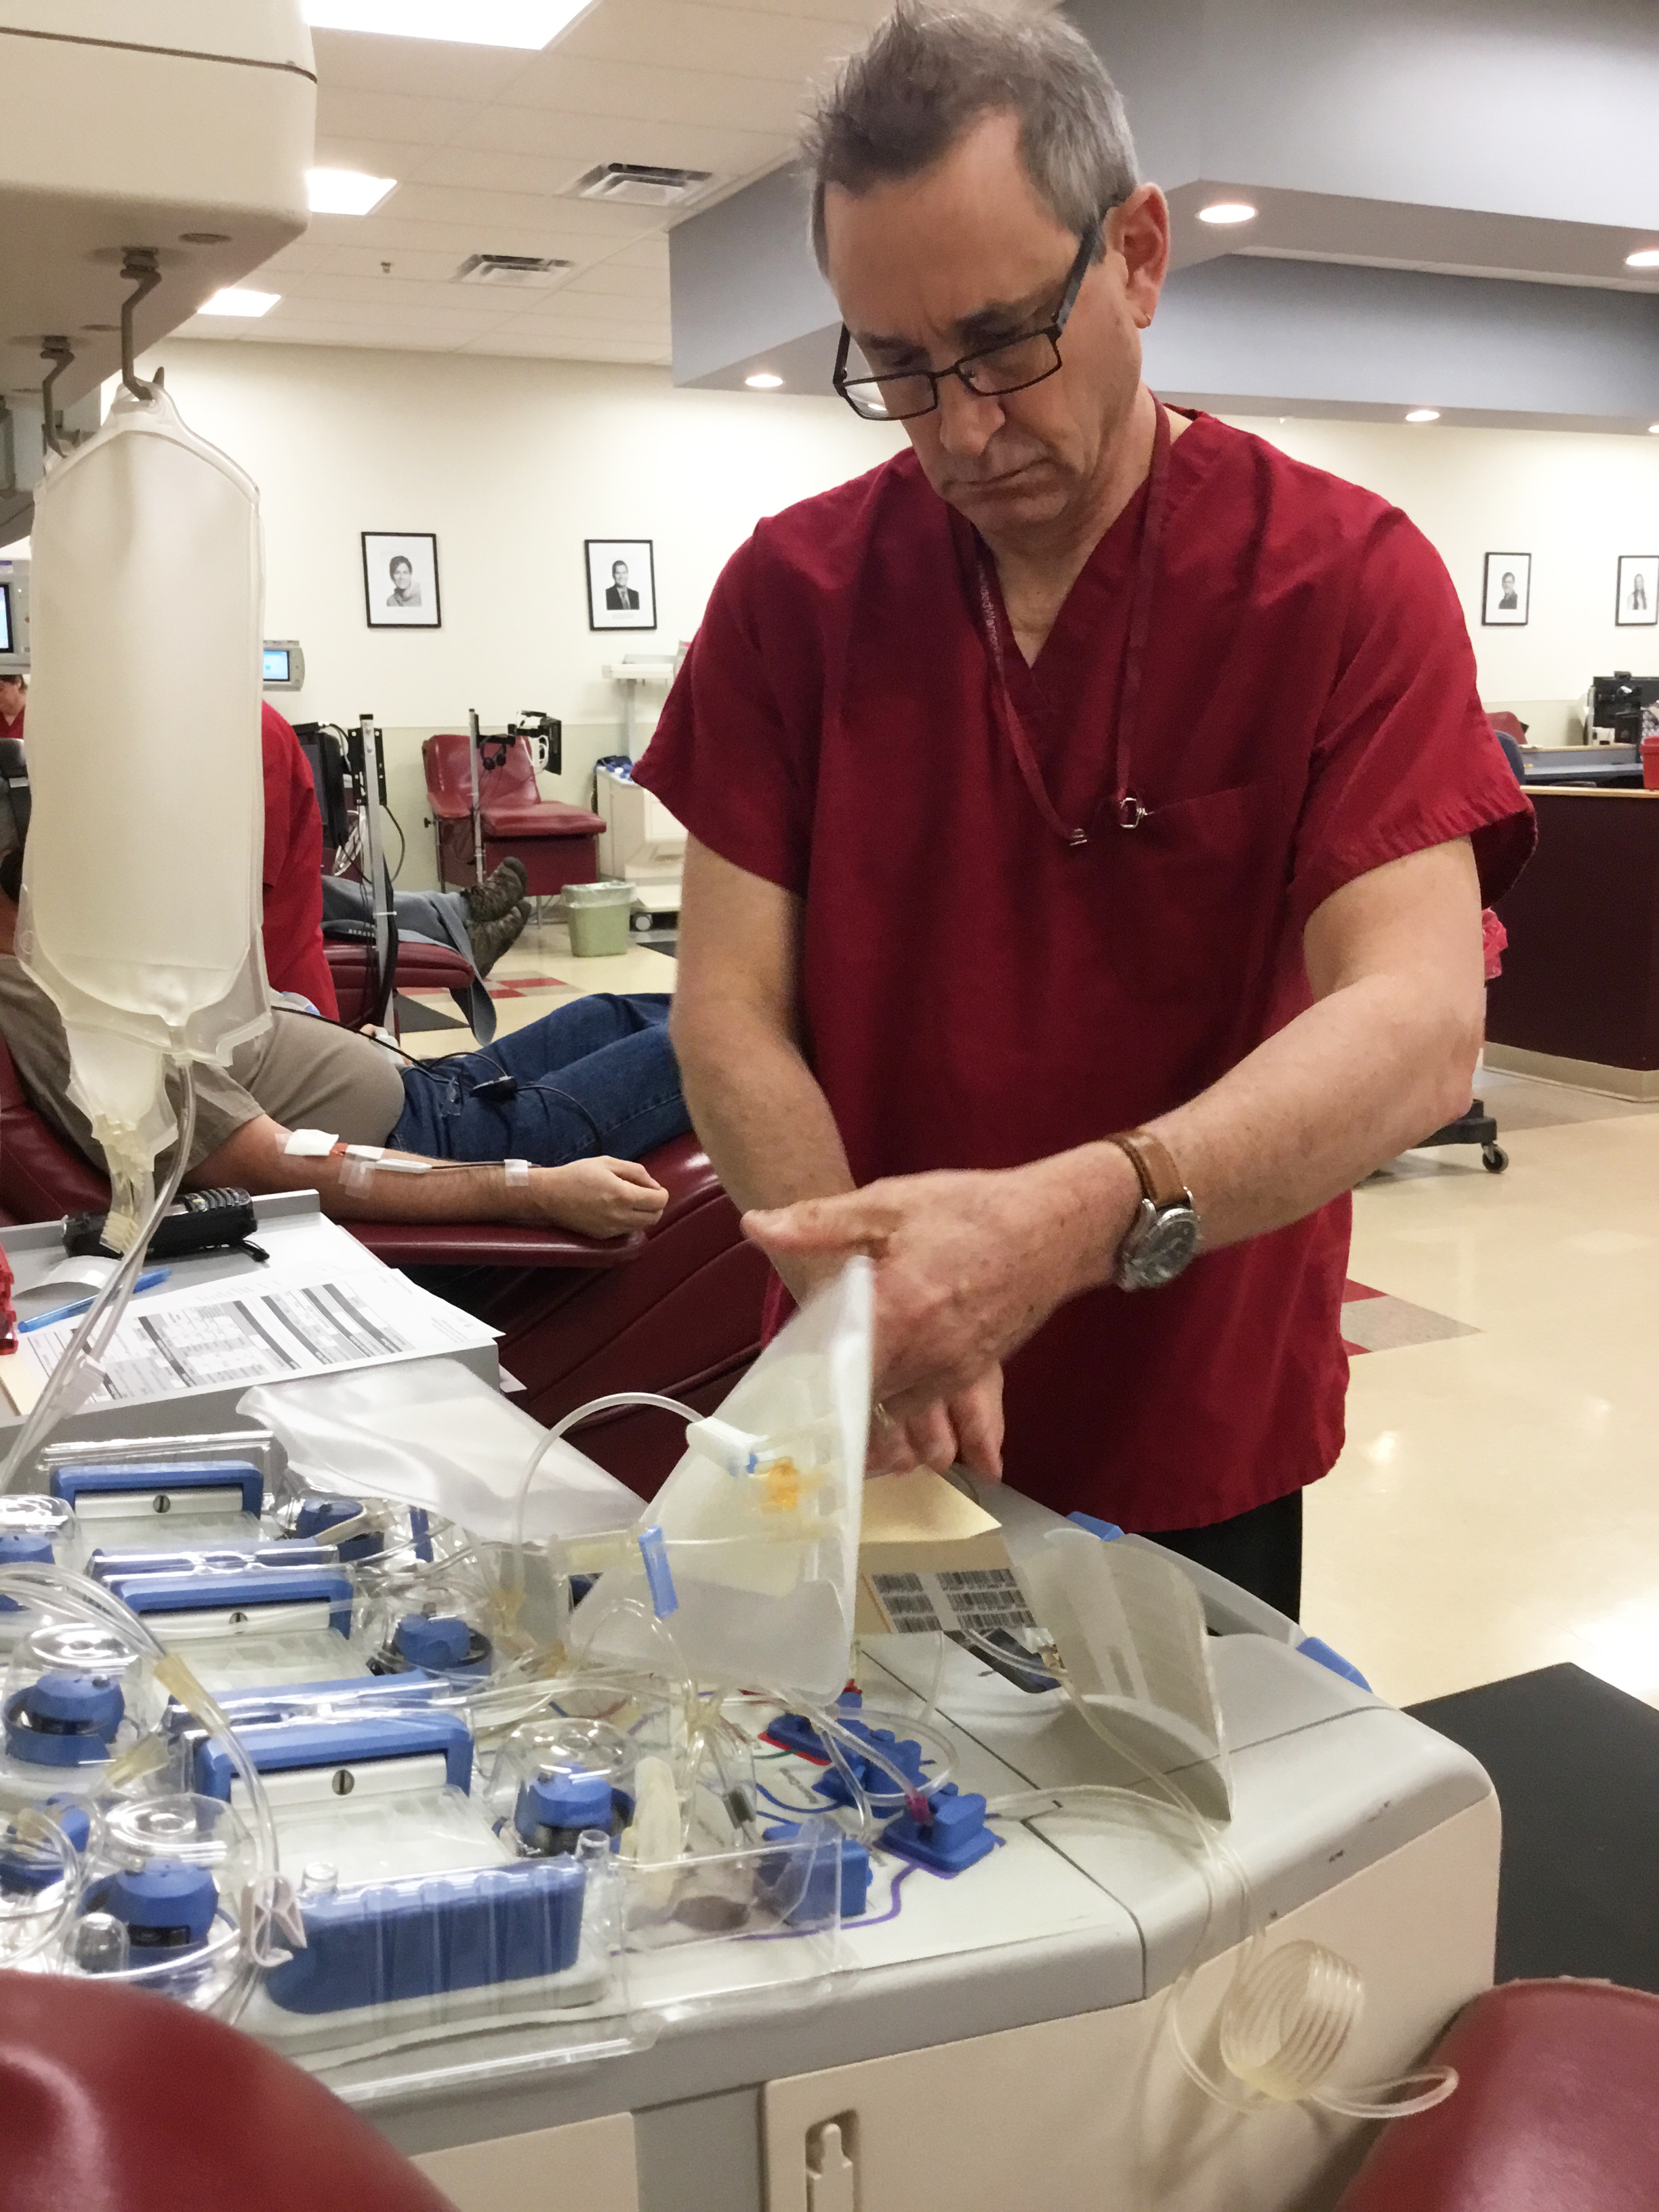 Scott Goodrich prepares equipment for a platelet donation at the Red Cross' Liverpool Blood Donation Center. Goodrich is a phlebotomist, someone trained to draw blood from patients. (PHOTO BY SUSAN KEETER)